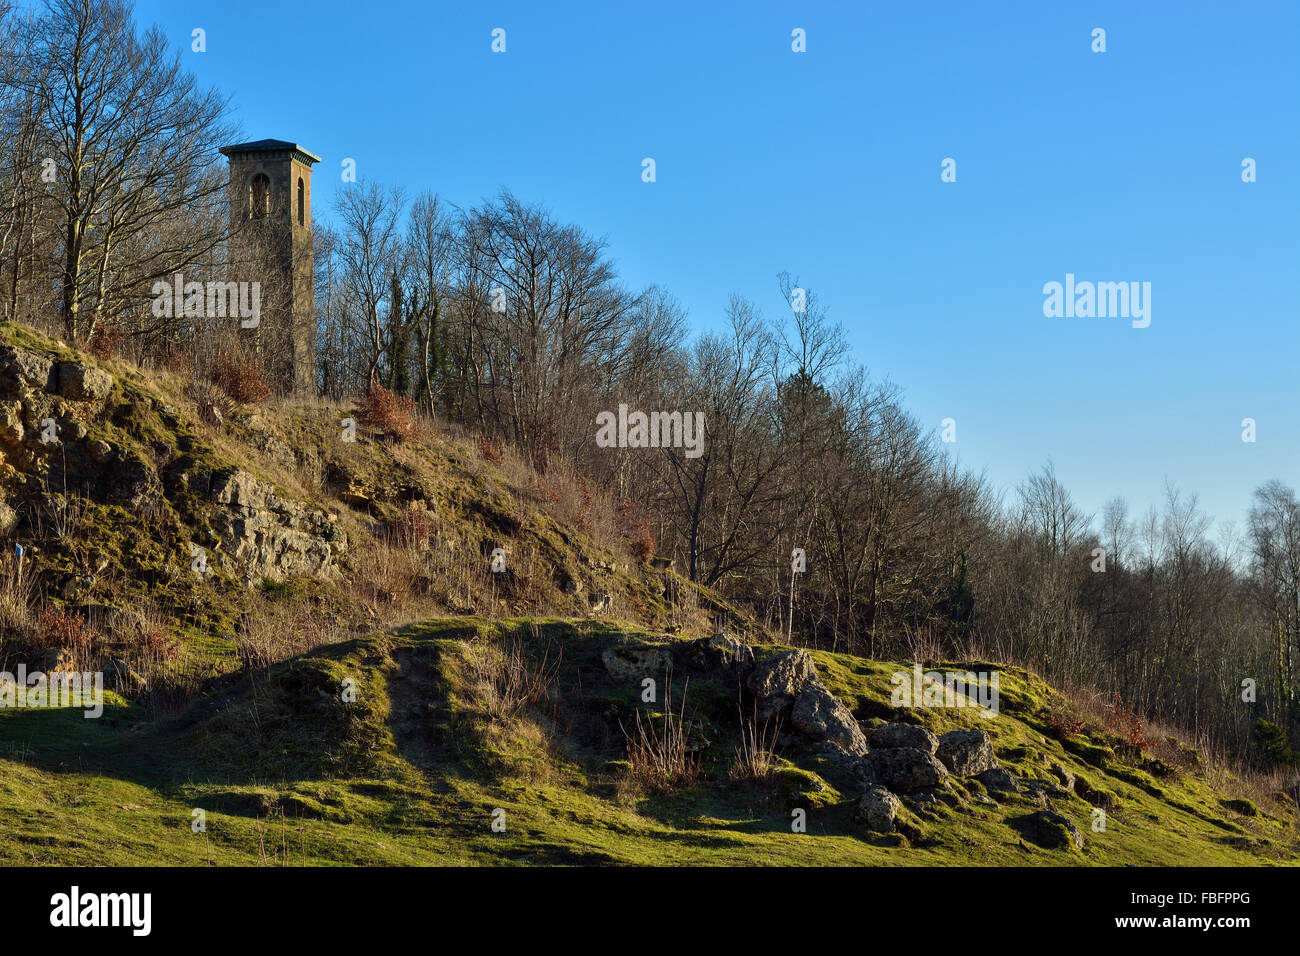 The 'Pepper Pot' at Brown's Folly. Brown's Folly standing in a former quarry showing grazed unimproved grassland Stock Photo